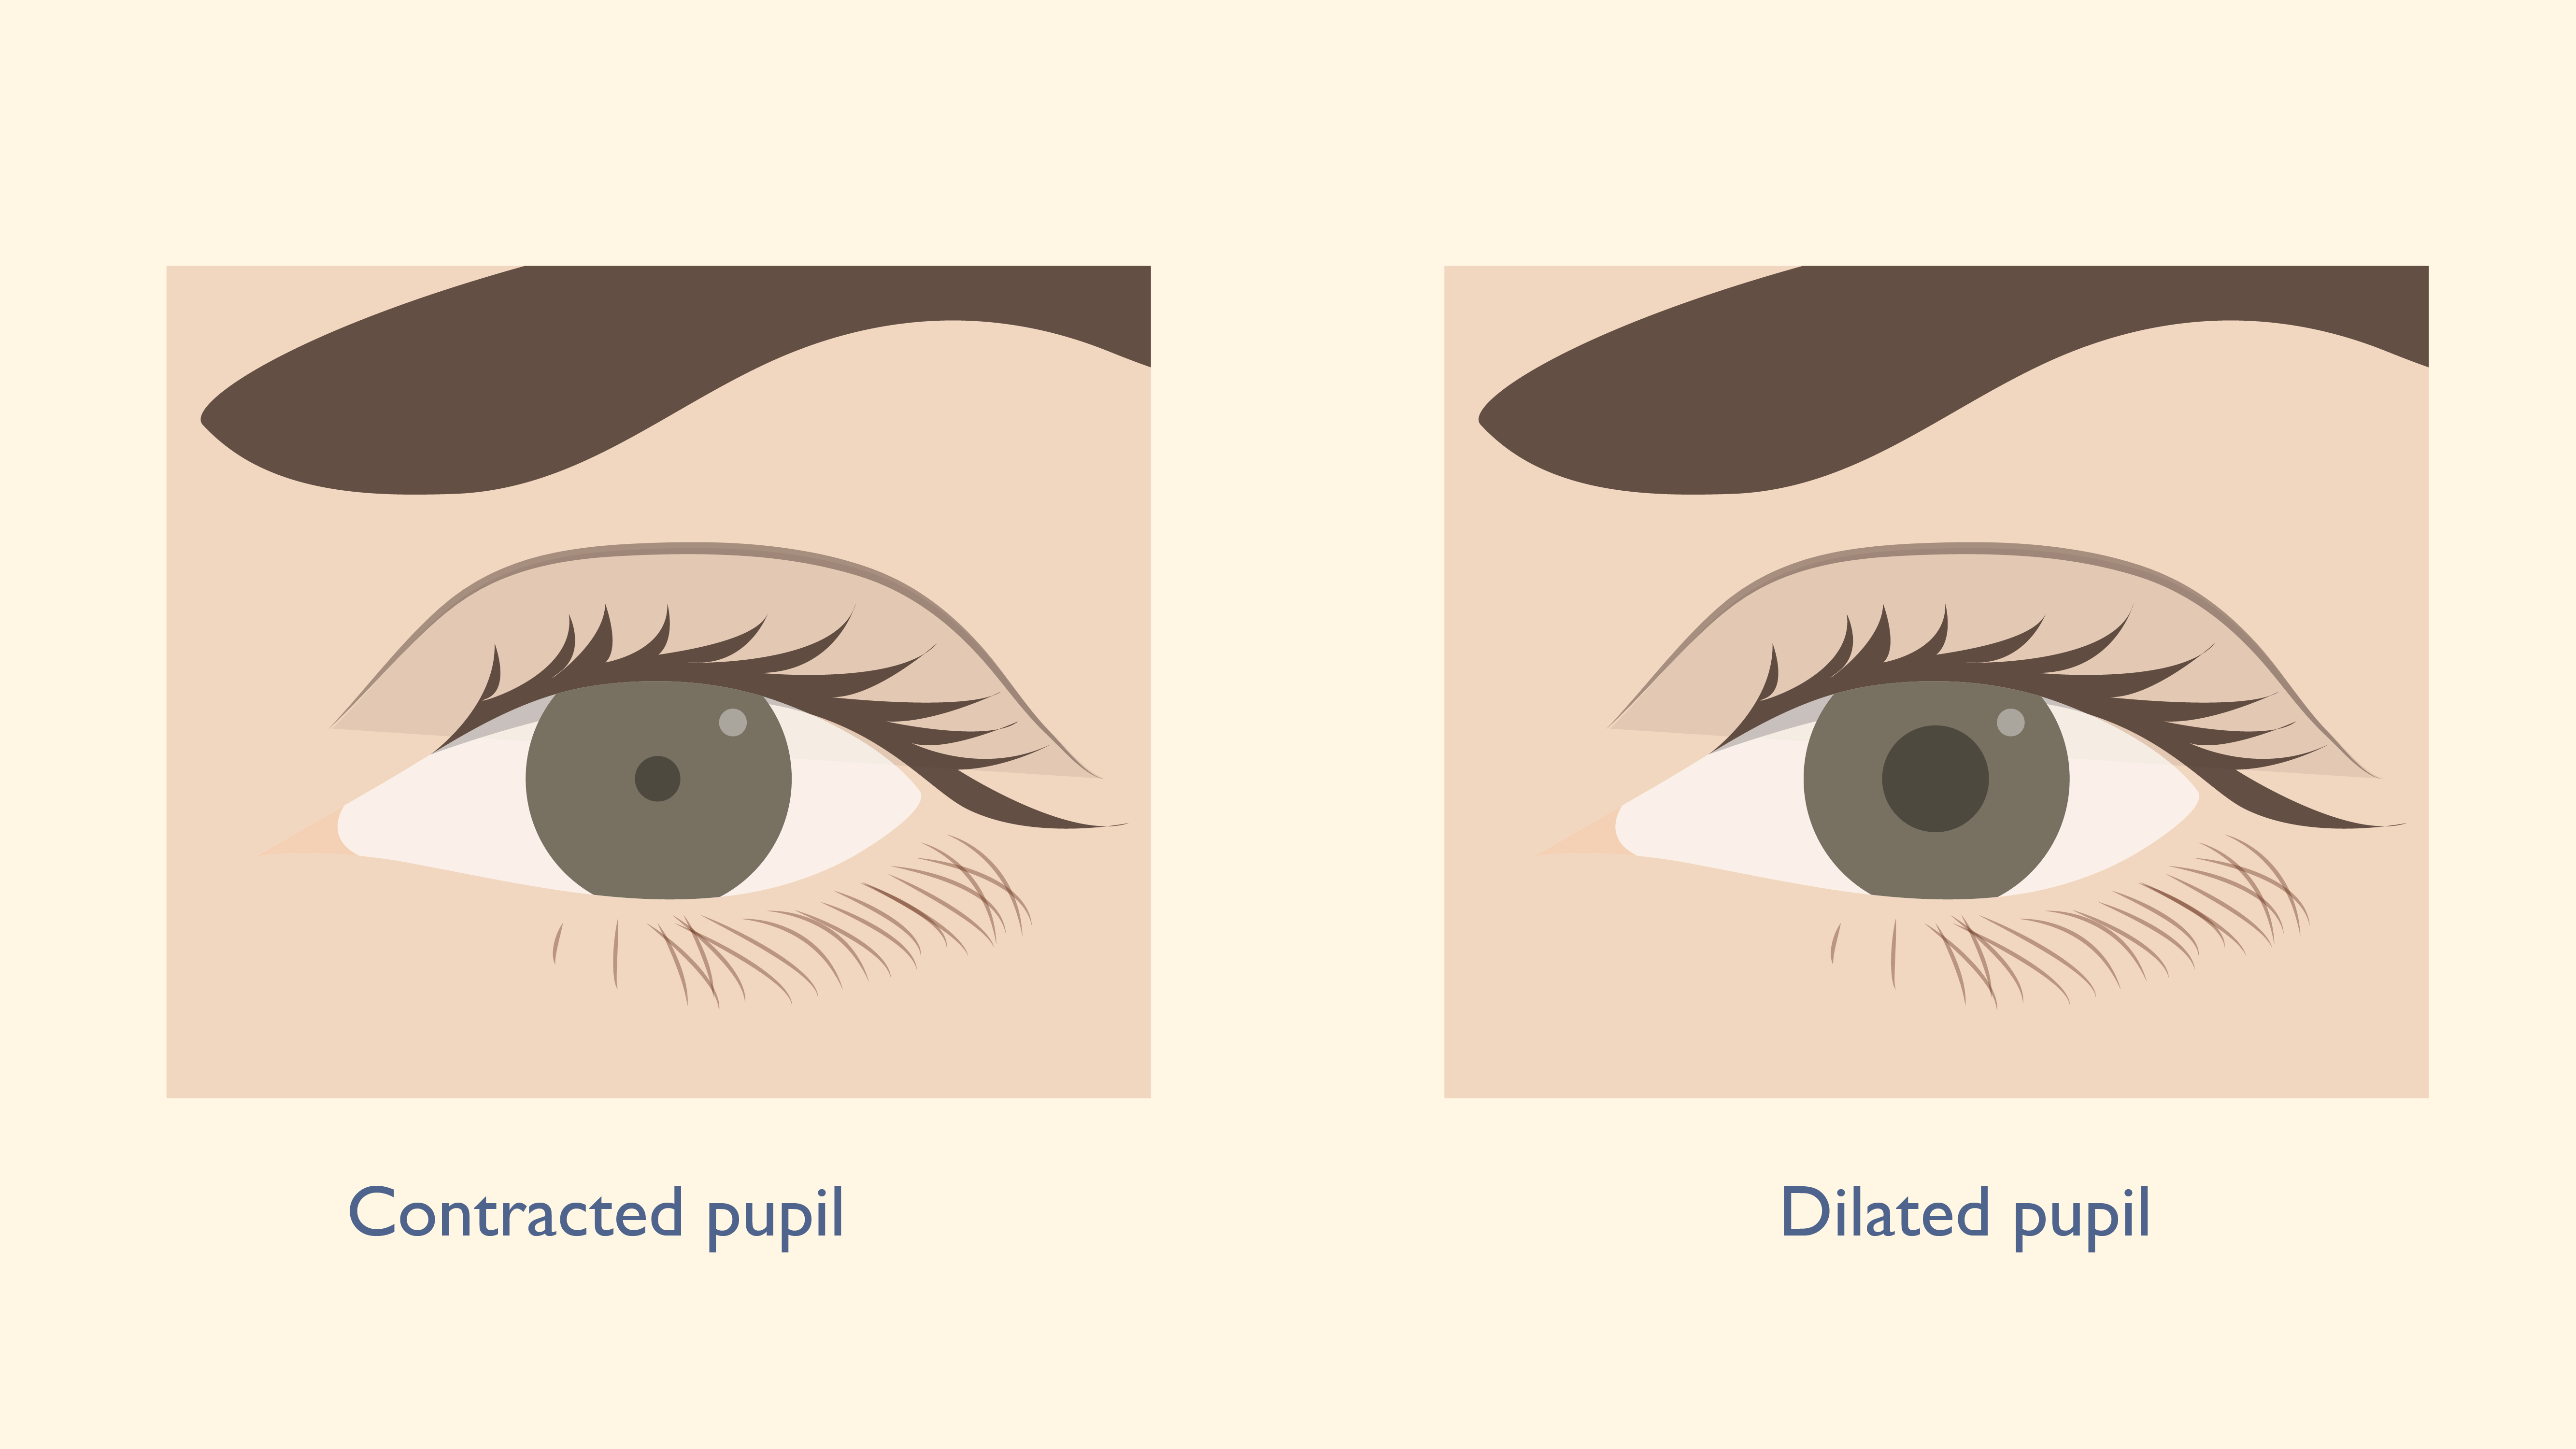 Subtle Eye Gestures That Can Help You Earn the Trust of Others